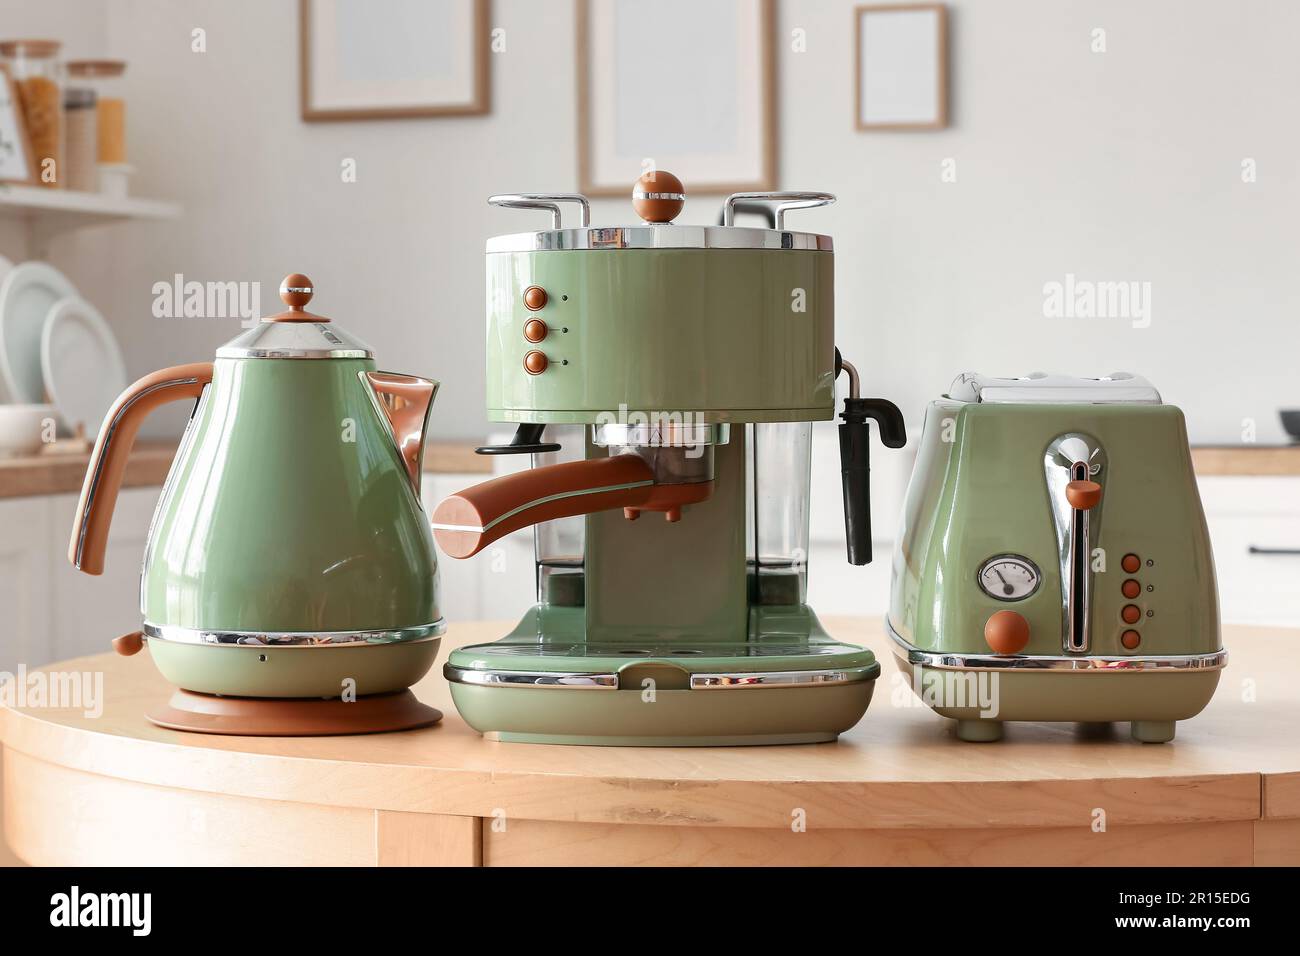 https://c8.alamy.com/comp/2R15EDG/electric-kettle-toaster-and-coffee-machine-on-wooden-table-in-kitchen-2R15EDG.jpg